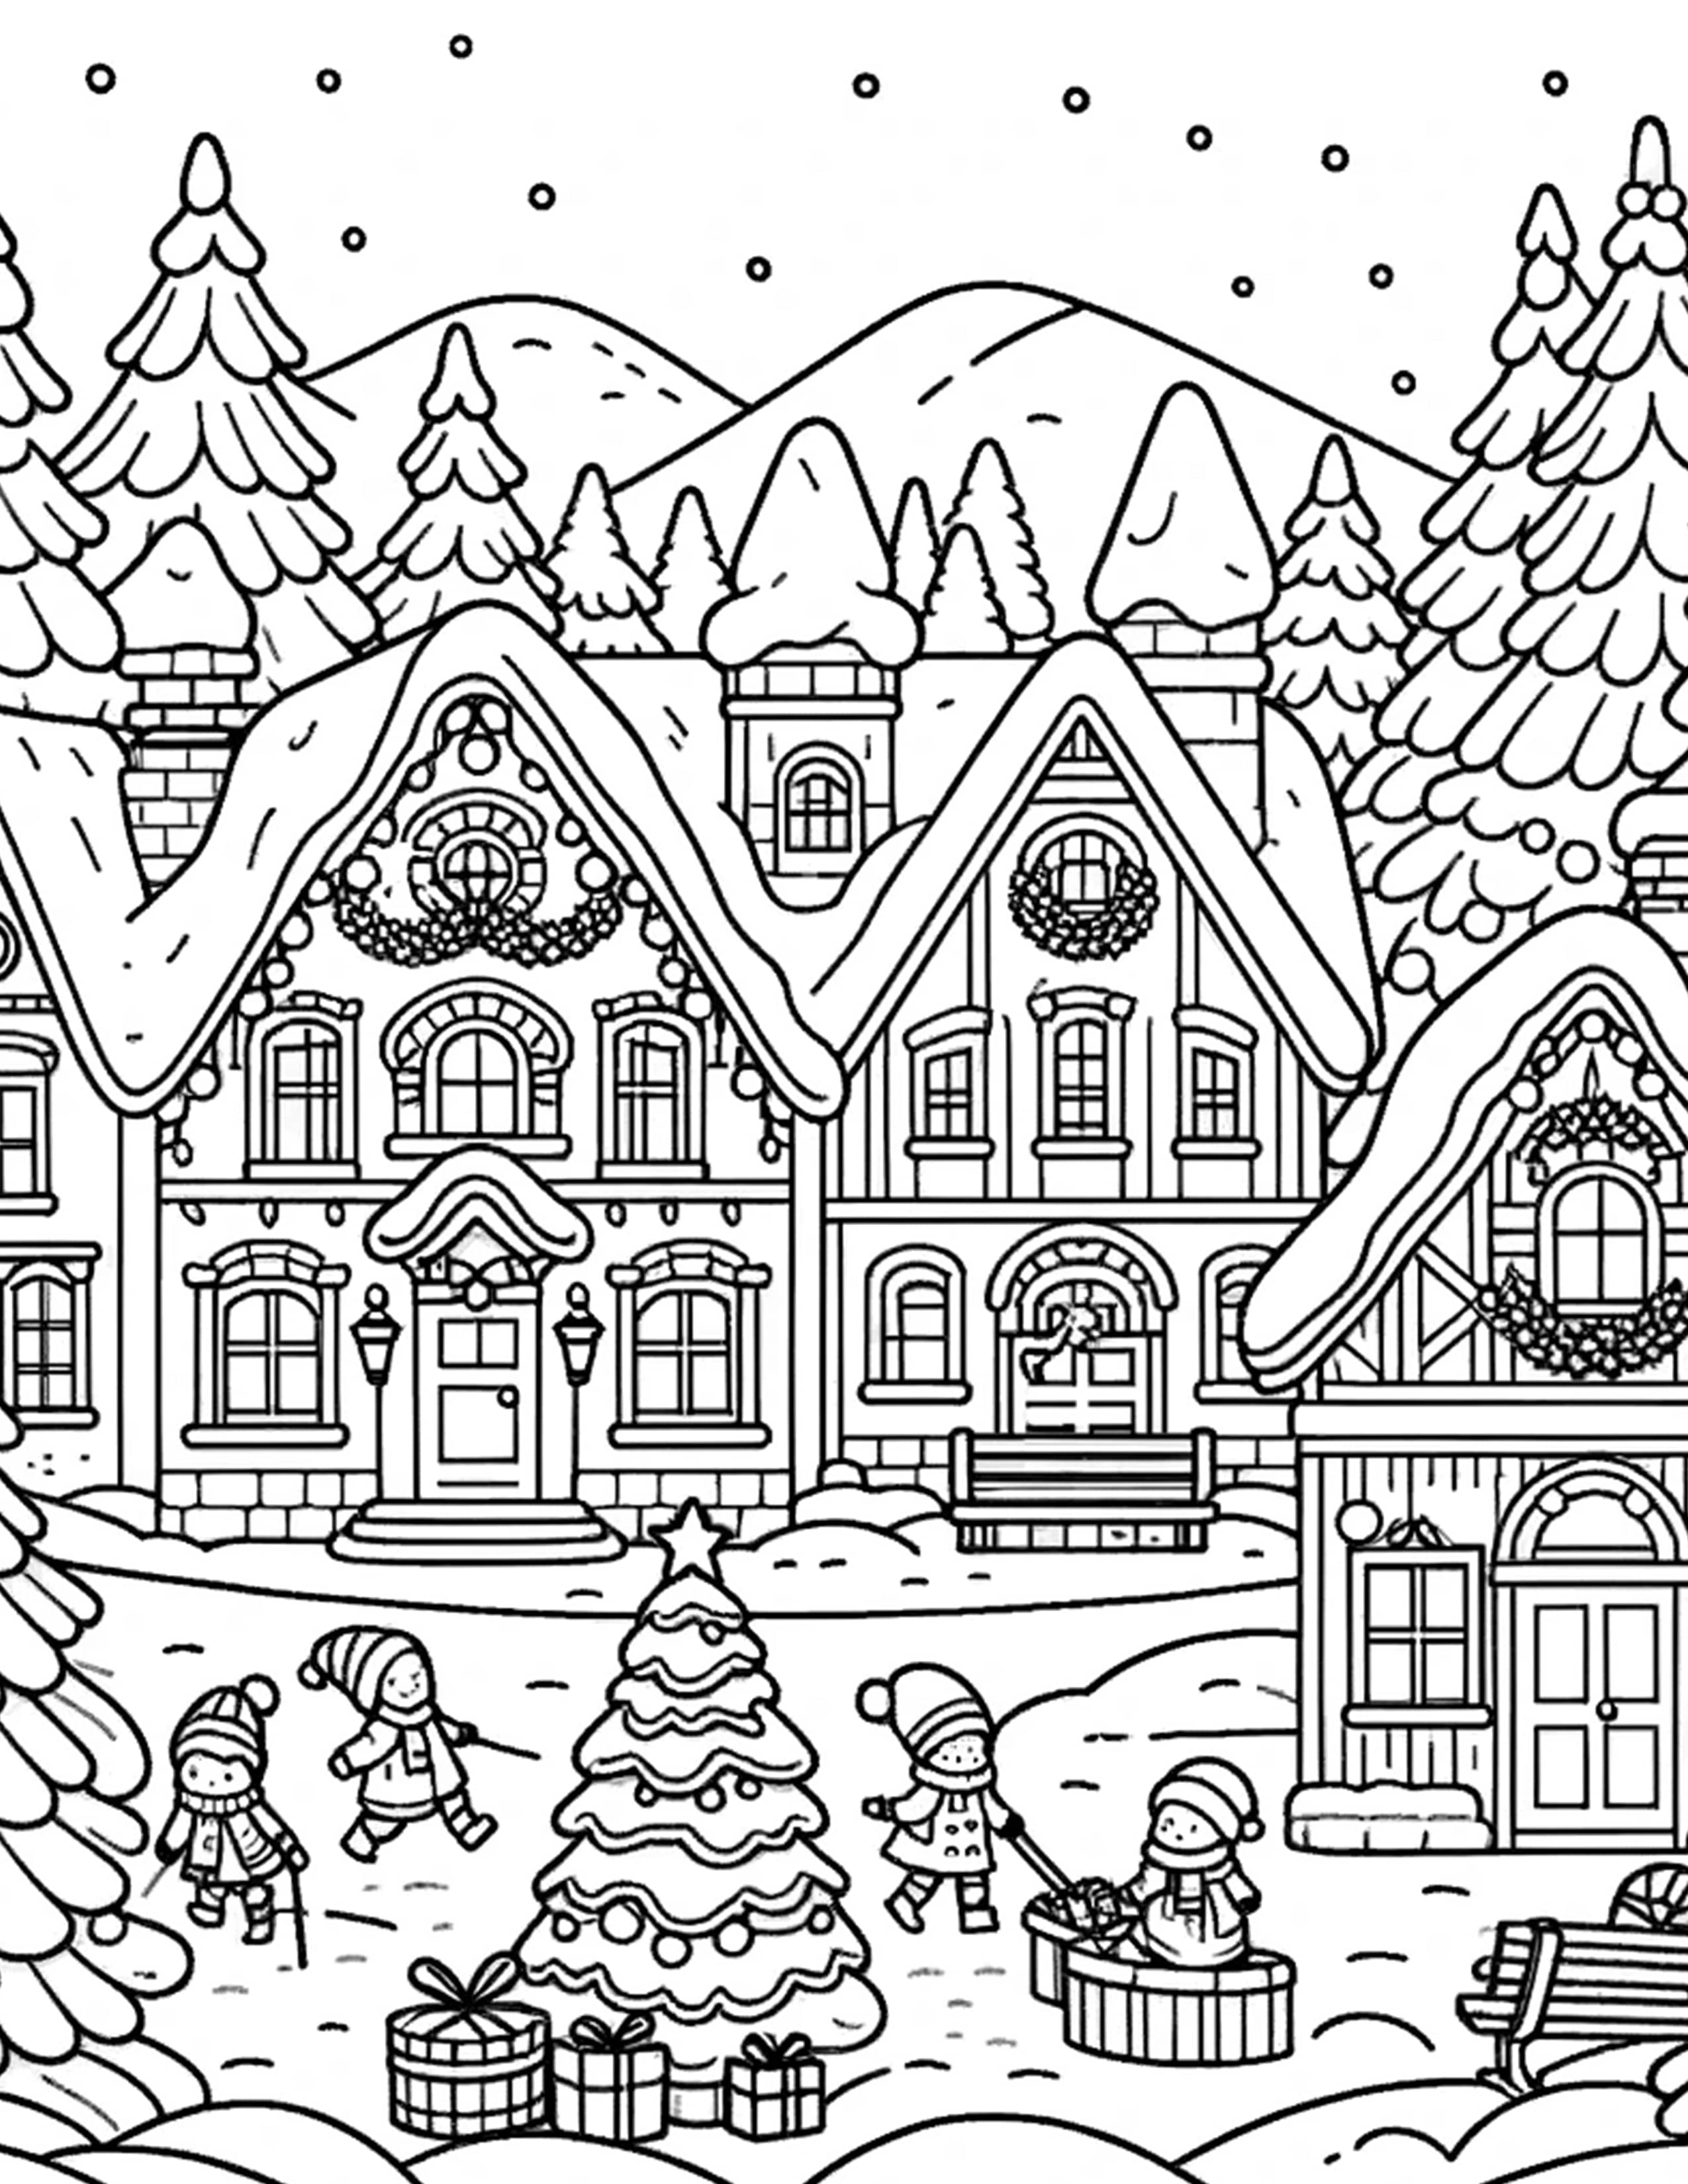 Christmas village coloring page